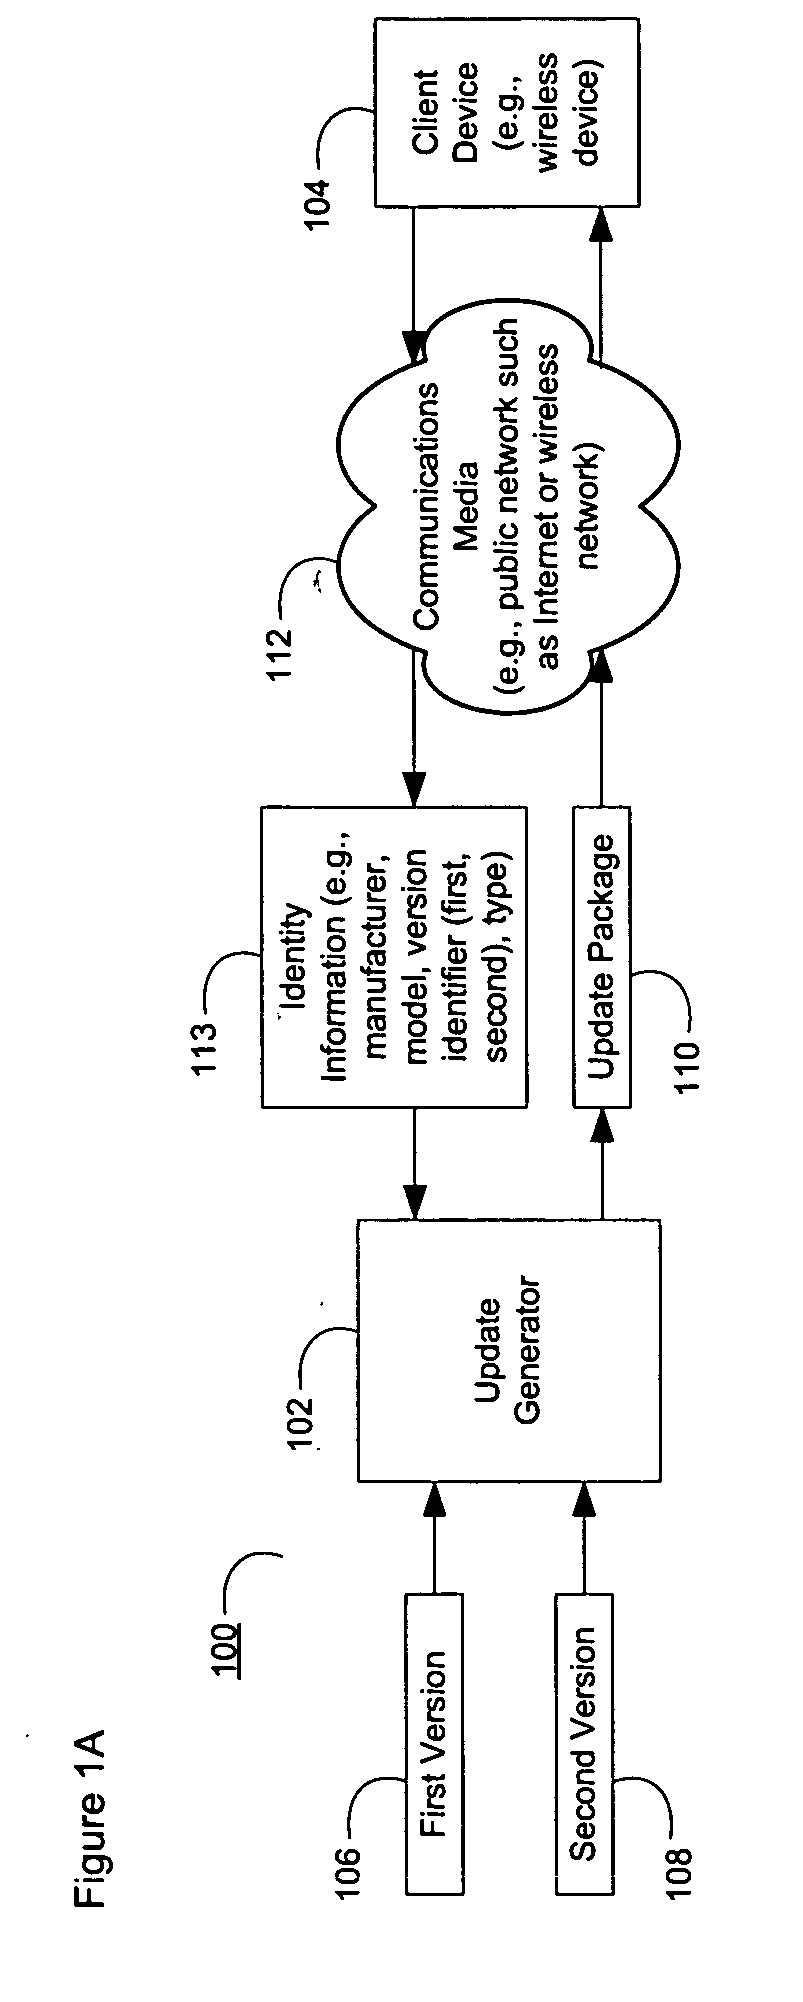 System and method for updating and distributing information